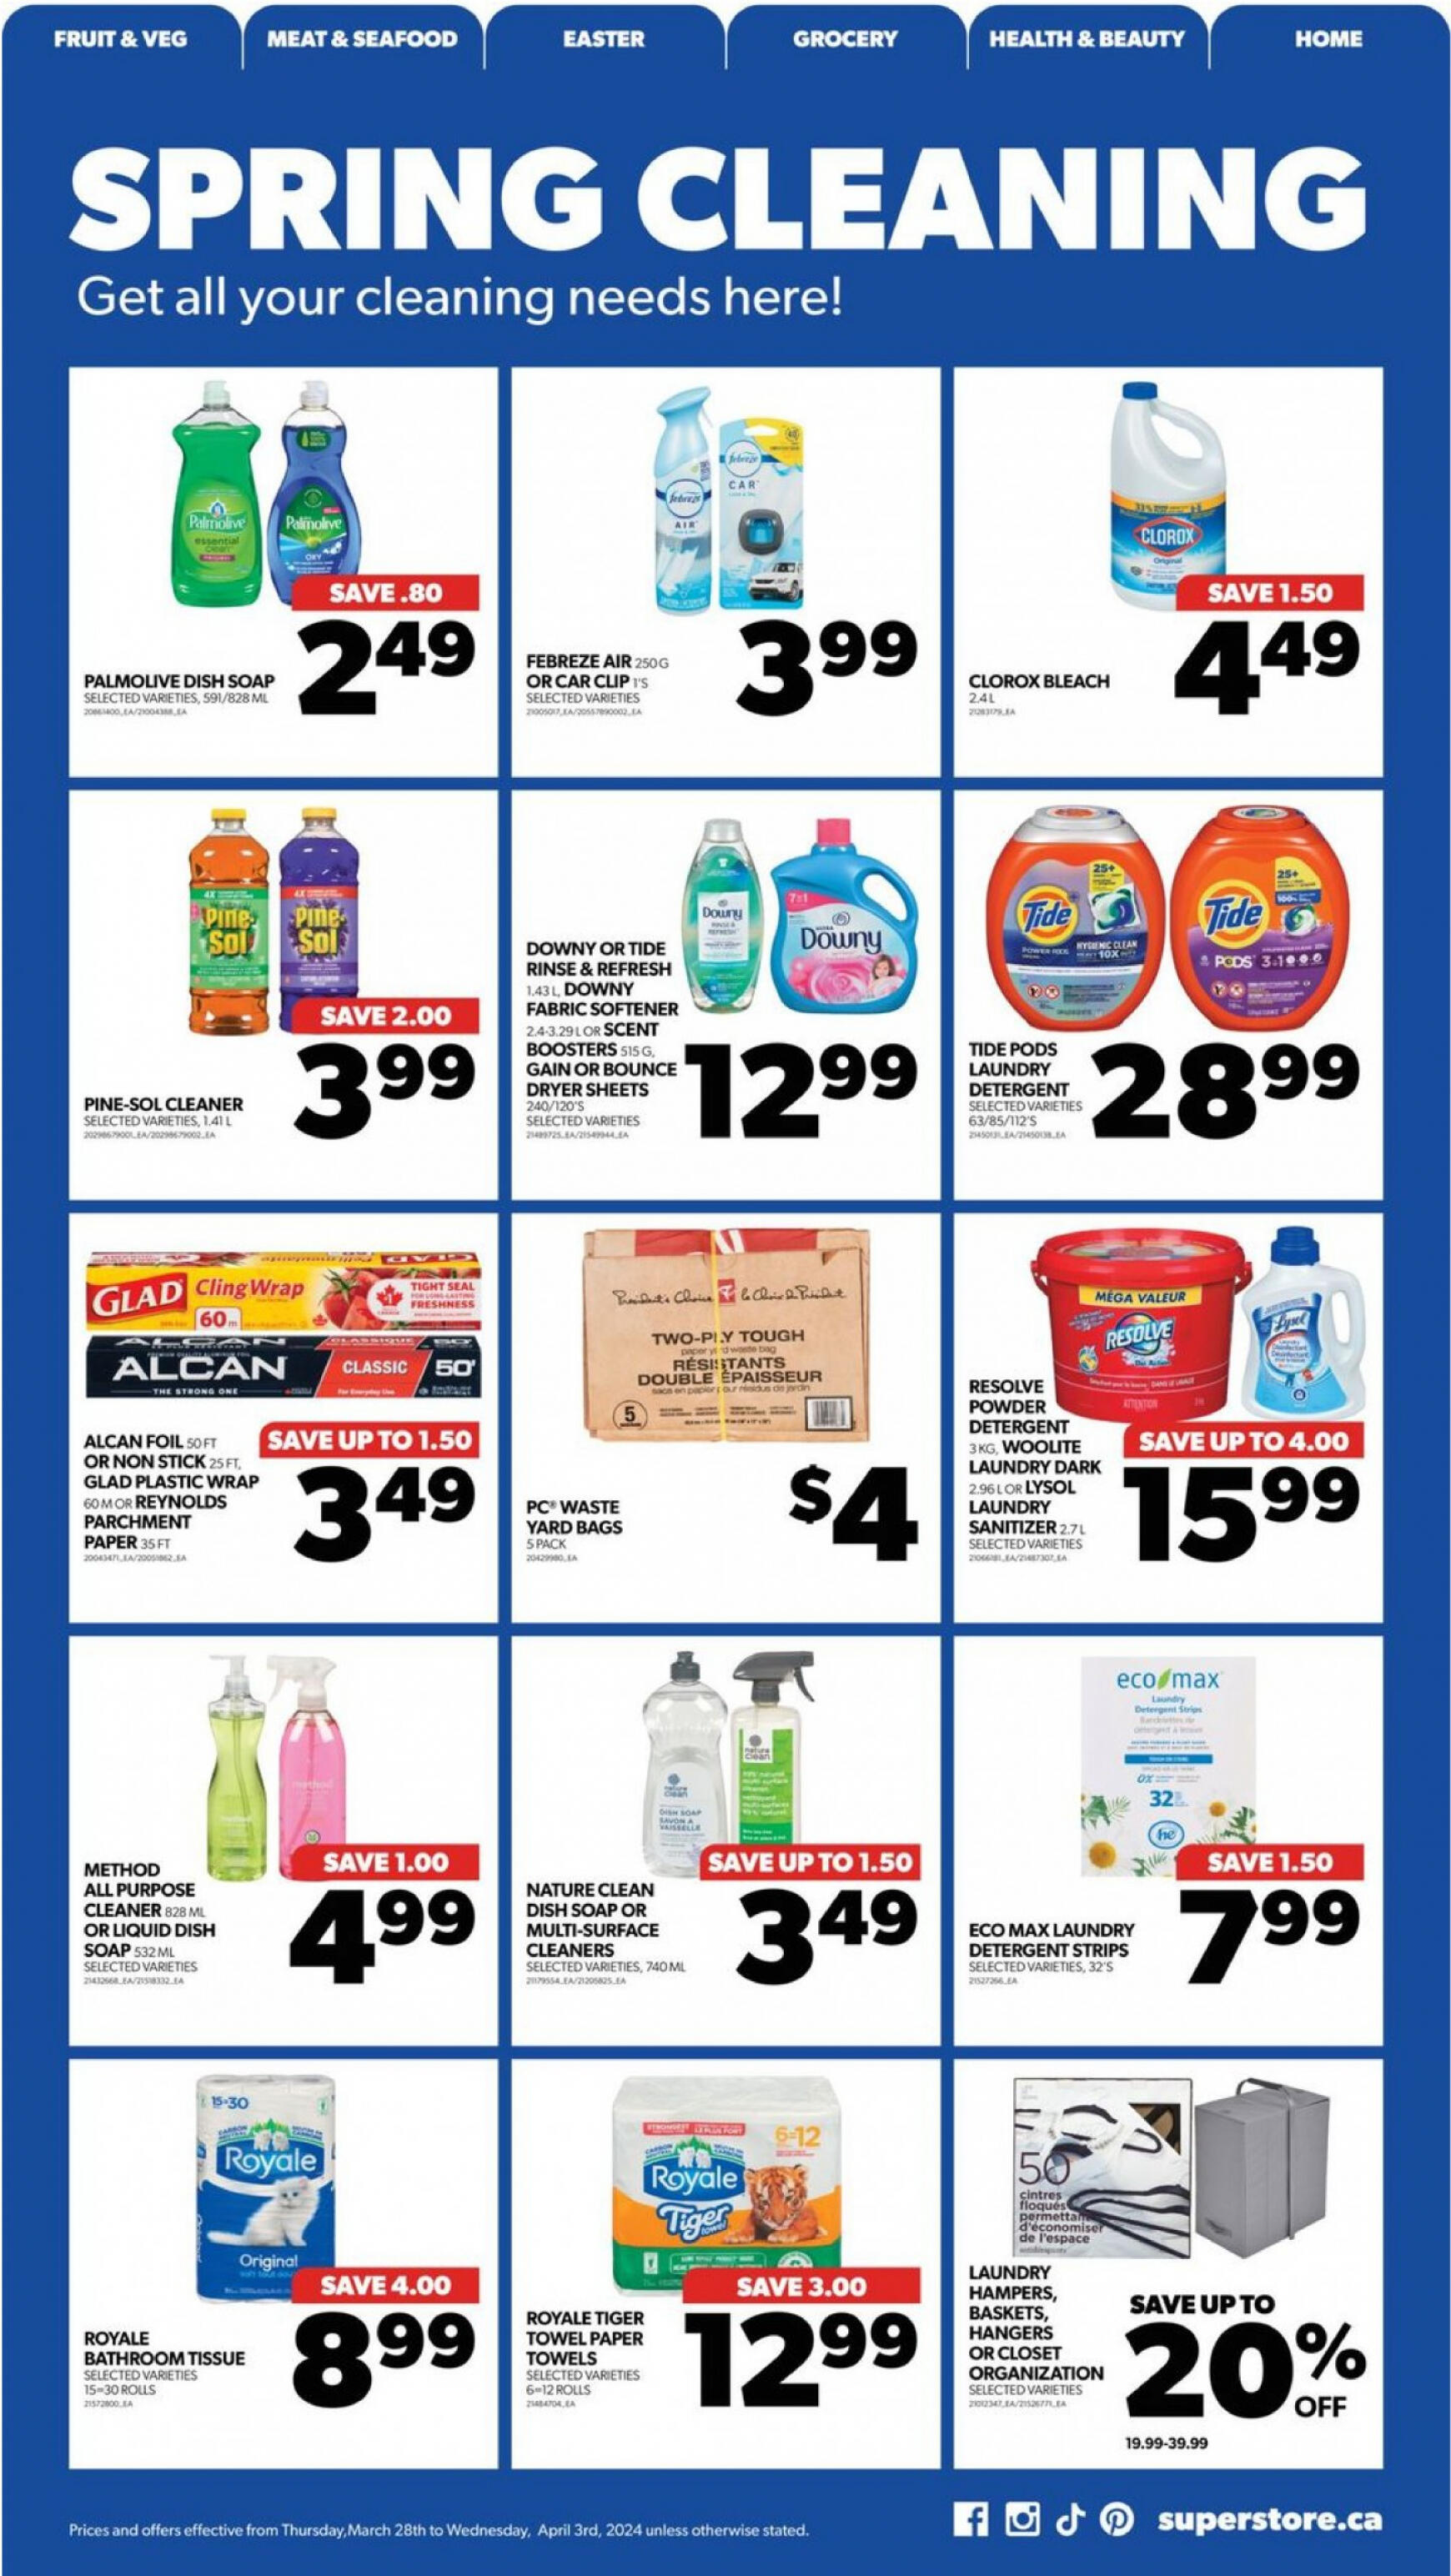 real-canadian-superstore - Real Canadian Superstore flyer current 28.03. - 03.04. - page: 24